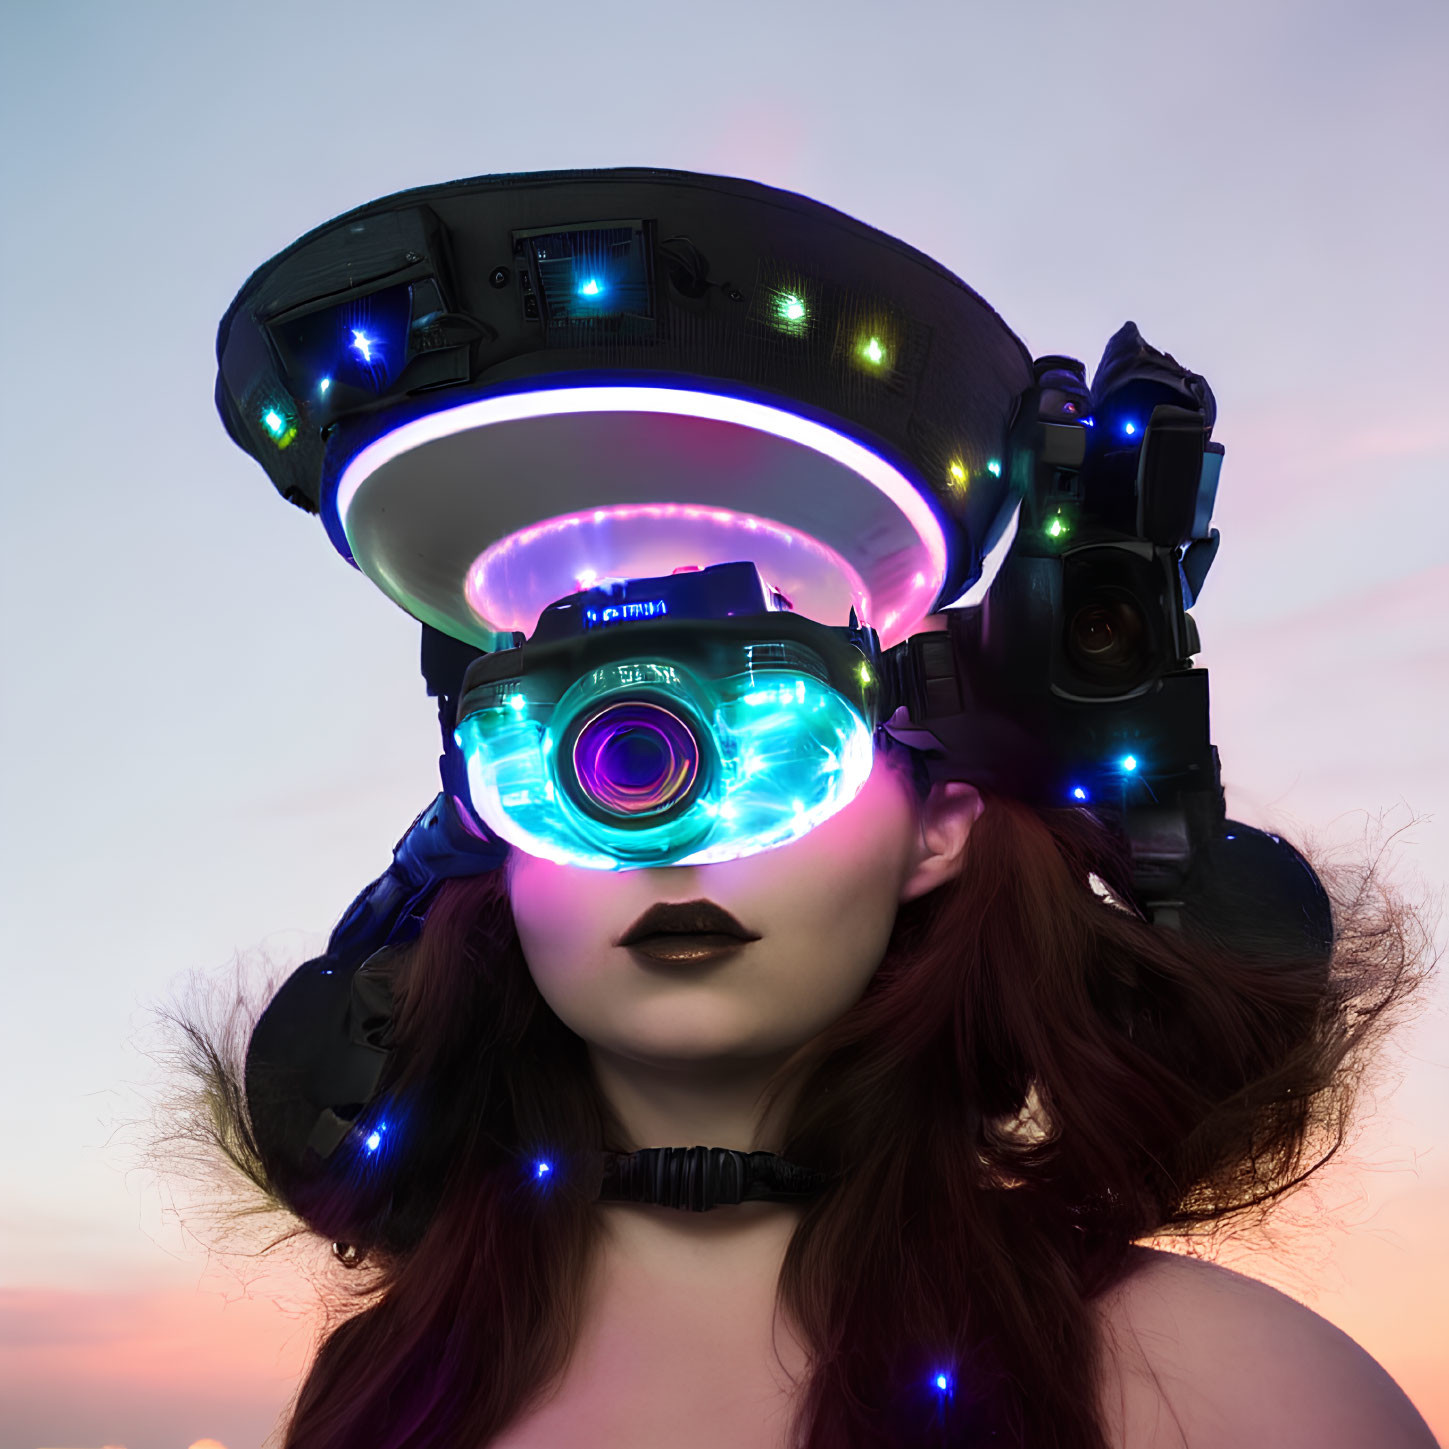 Futuristic woman wearing VR goggles with electronic devices under twilight sky